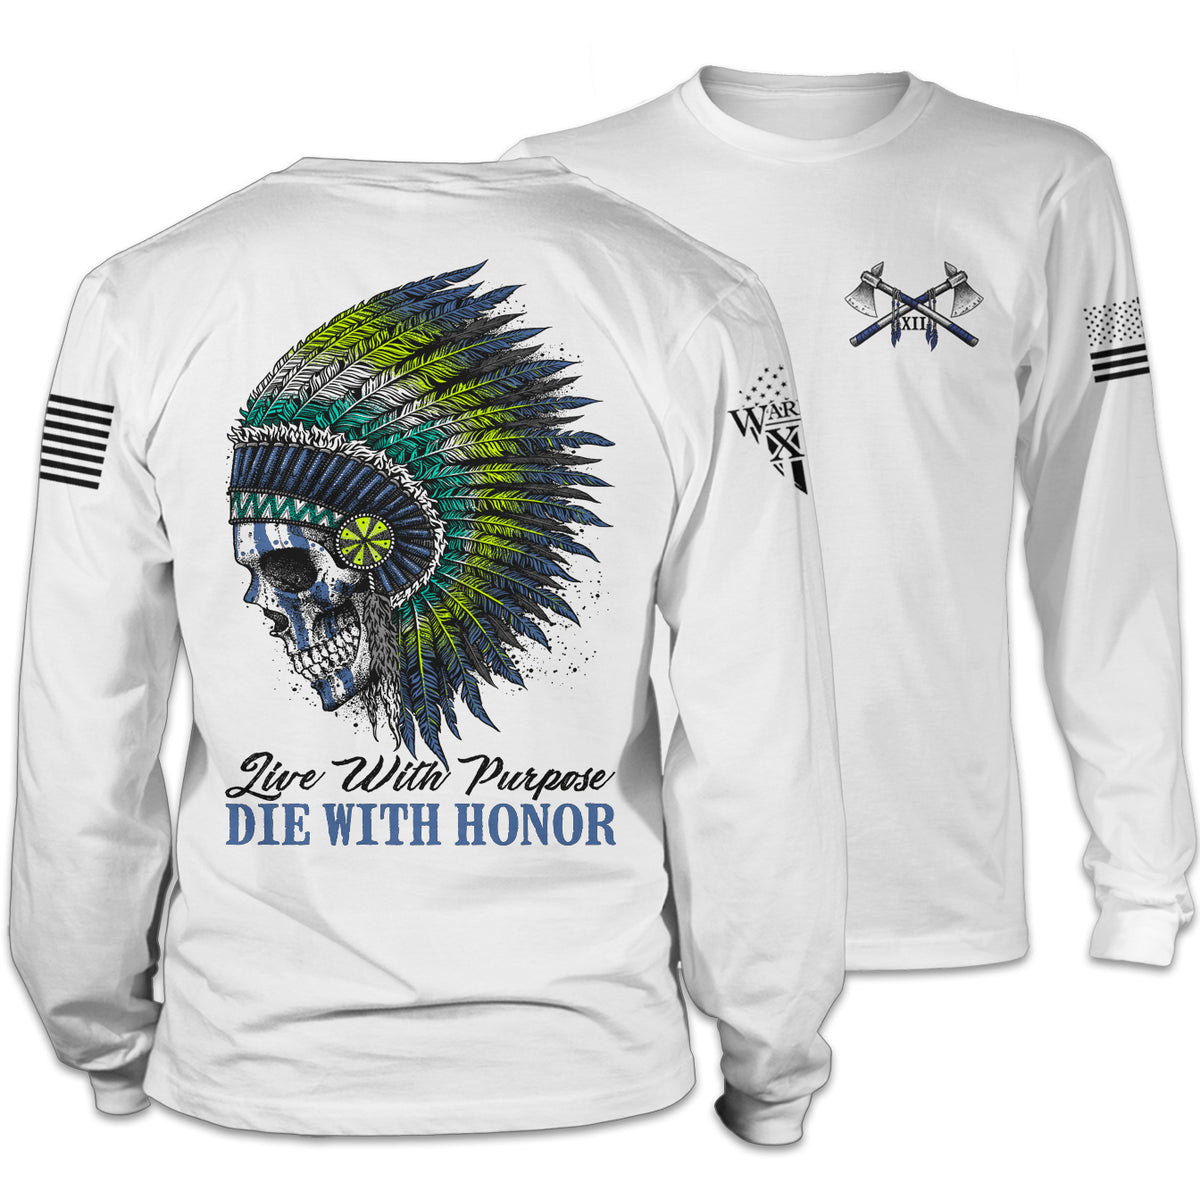 Front and back white long sleeve shirt with the words "Live With Purpose, Die With Honor" and a native American with a colorful crown.